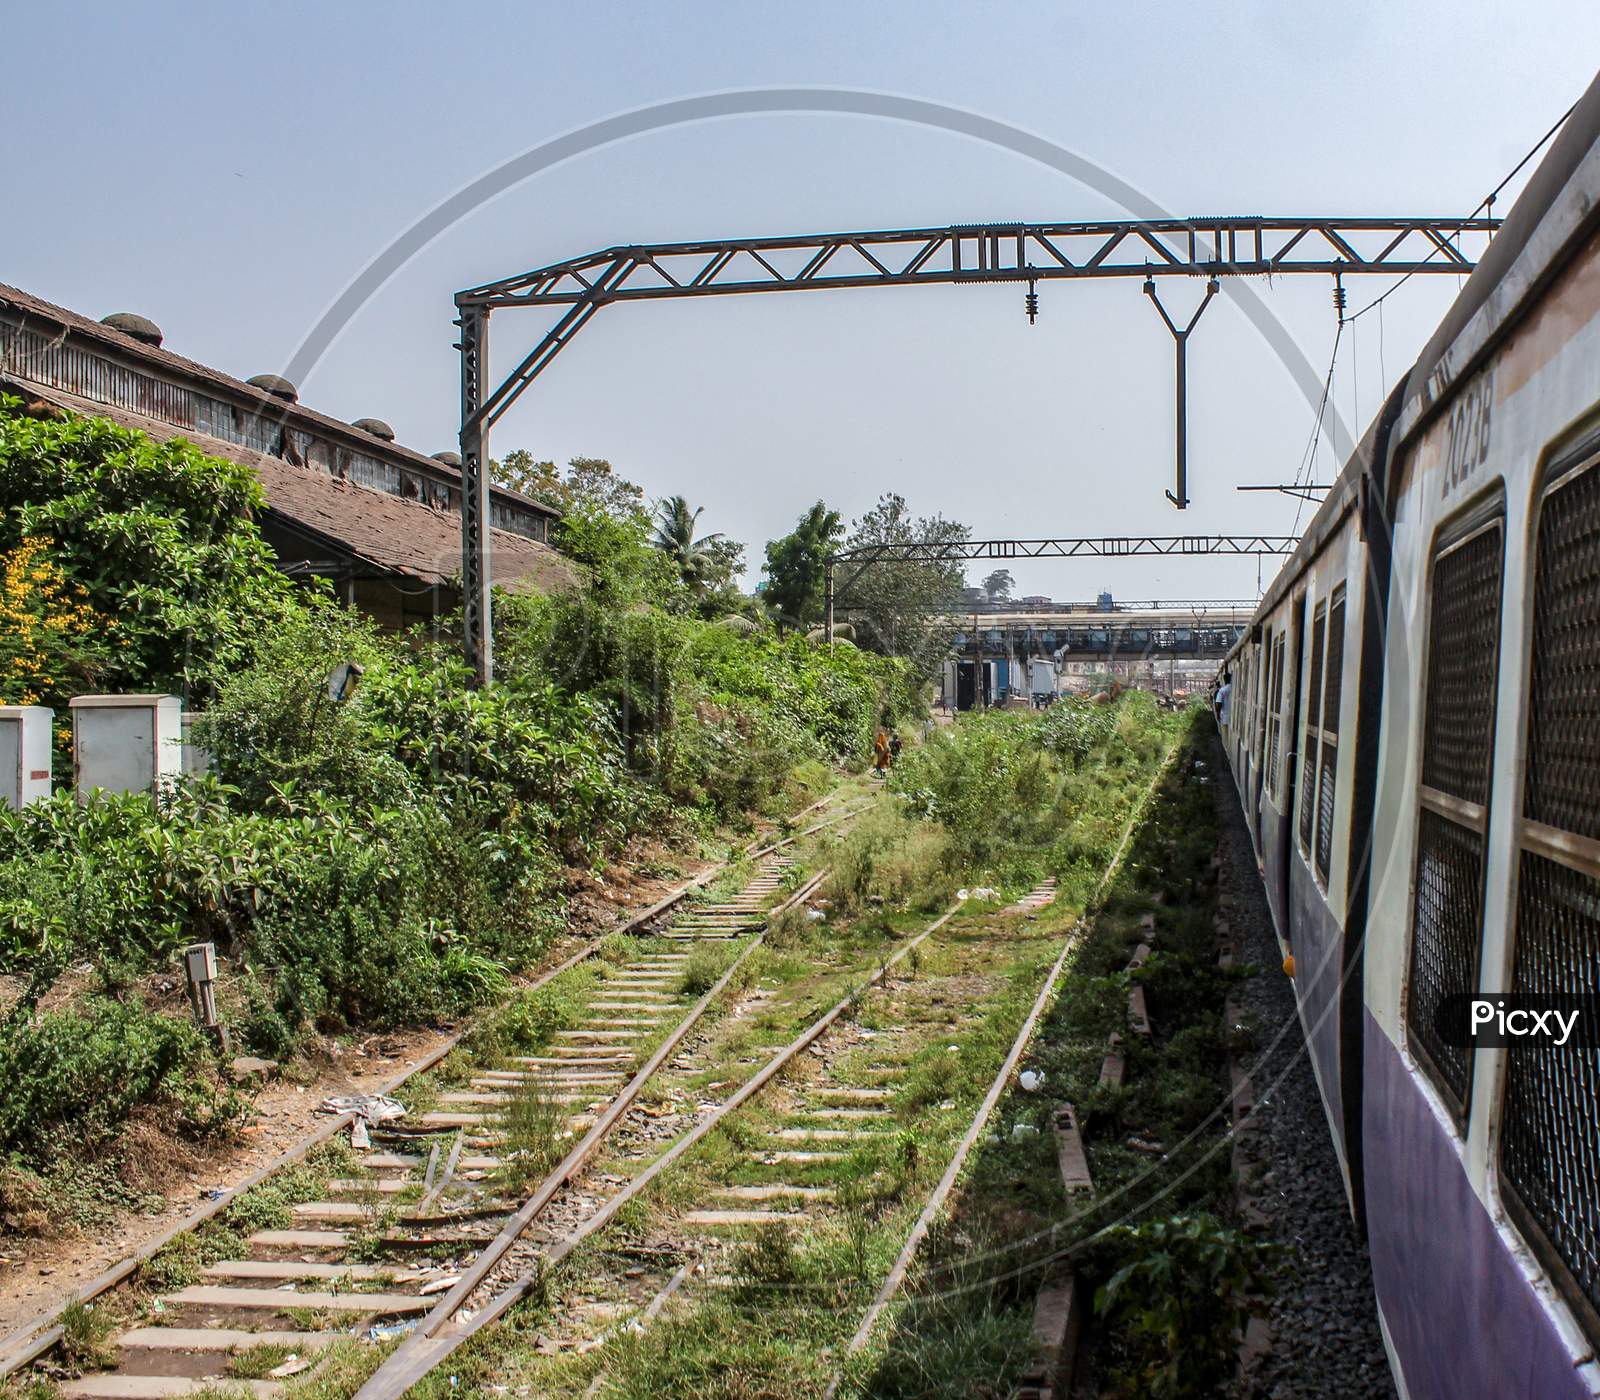 A Shot Of Outside Of Mumbai Local Train With Railway Lines.